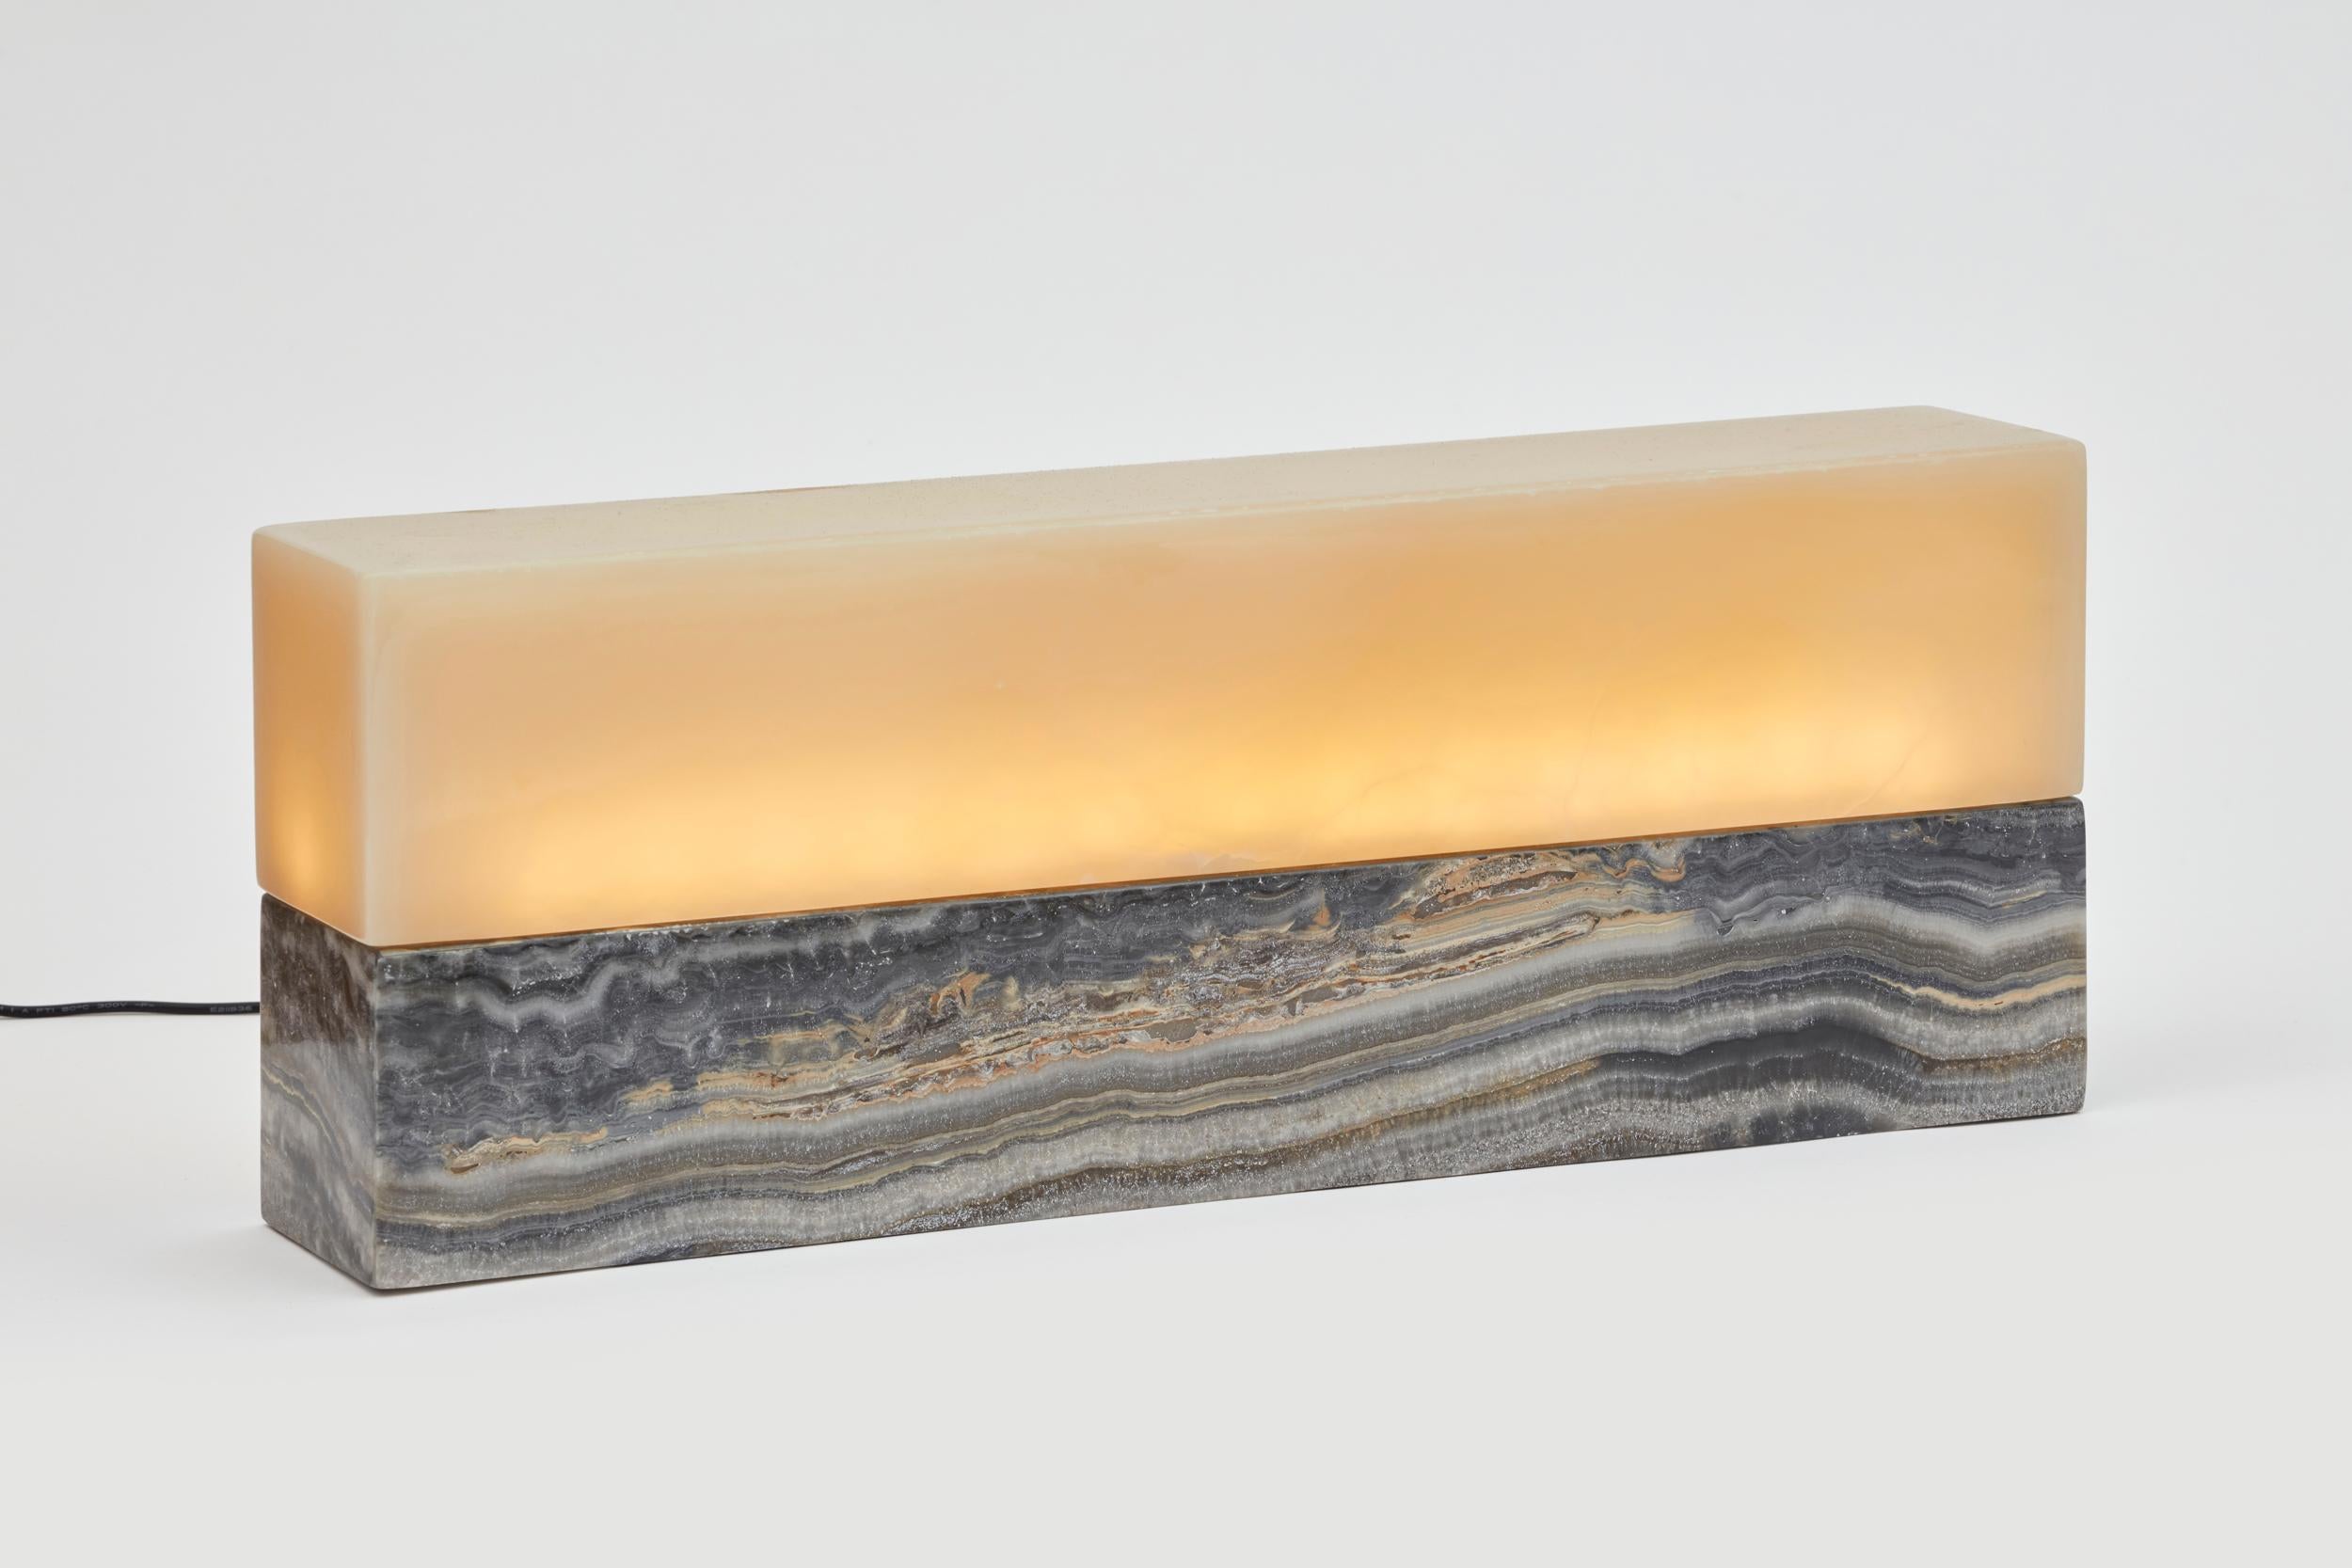 Objects of light N°5 by Estudio Rafael Freyre
Dimensions: W 51 x D 10 x H 19 cm
Materials: Andes onyx stones

Objects of light have a starting point in the origin and materiality of Calcium Onyx, a cryptocrystalline variety silica with